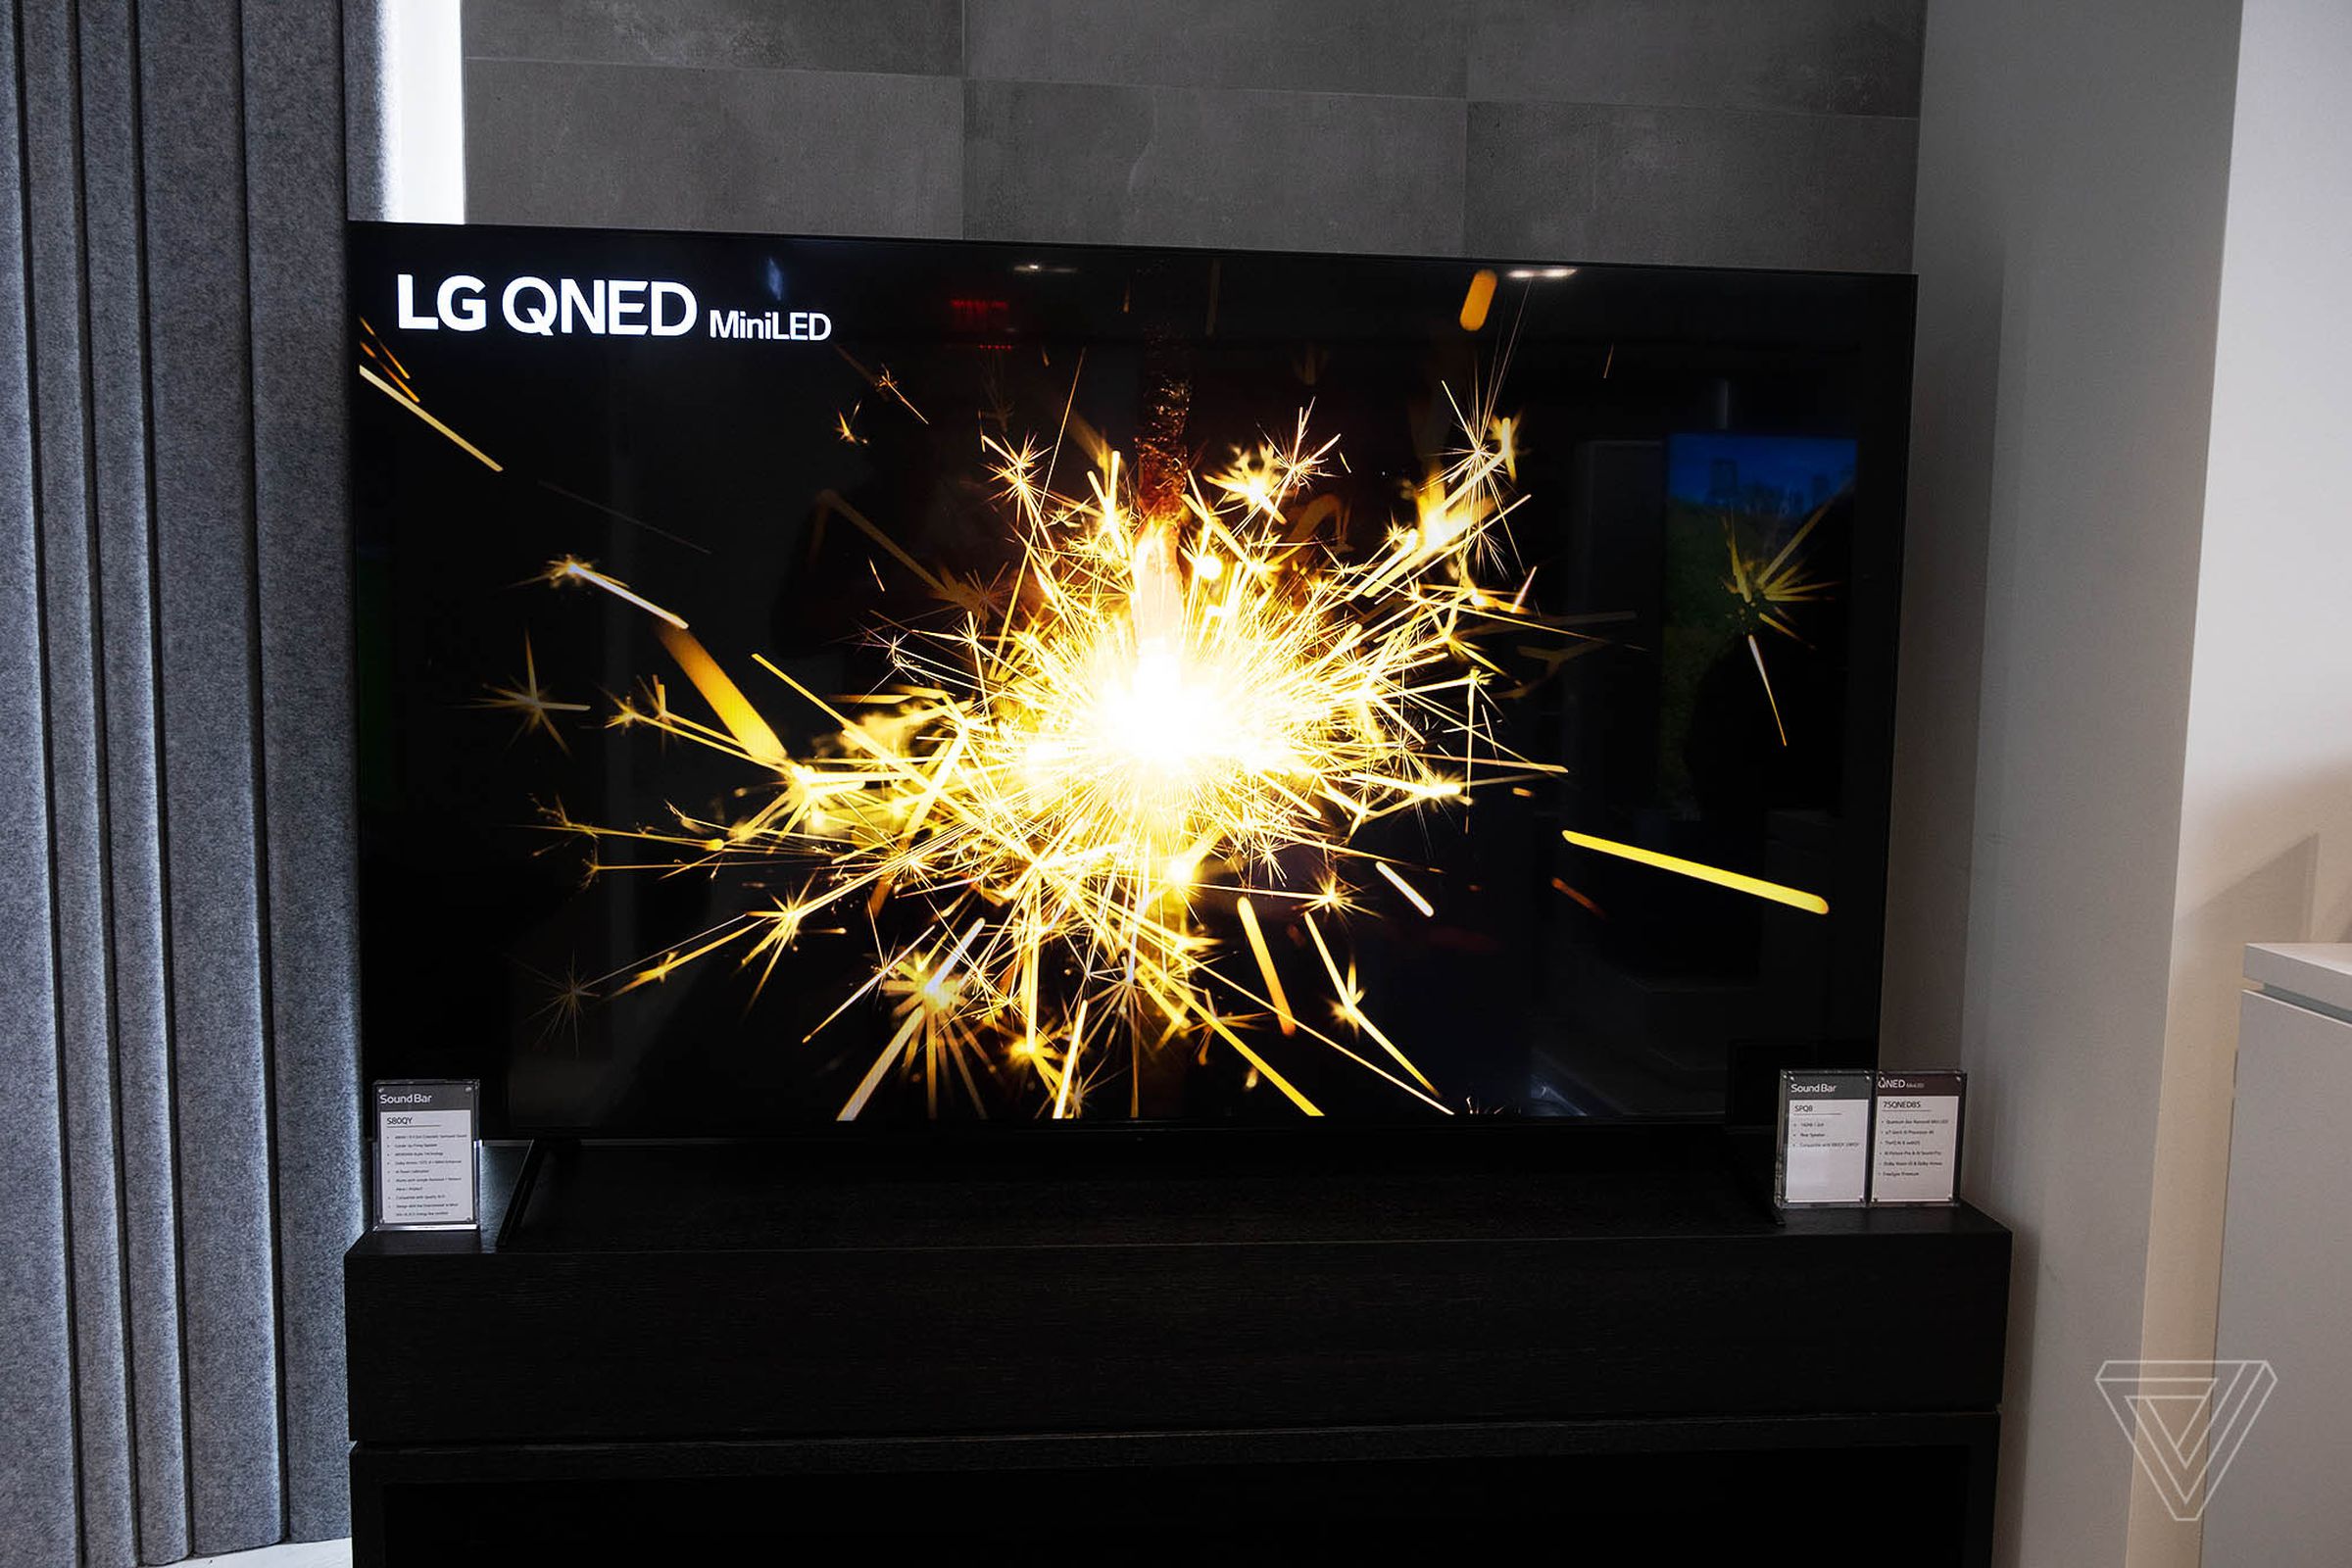 Mini LED brings LG’s QNED TVs closer to the contrast of OLED — with better brightness.